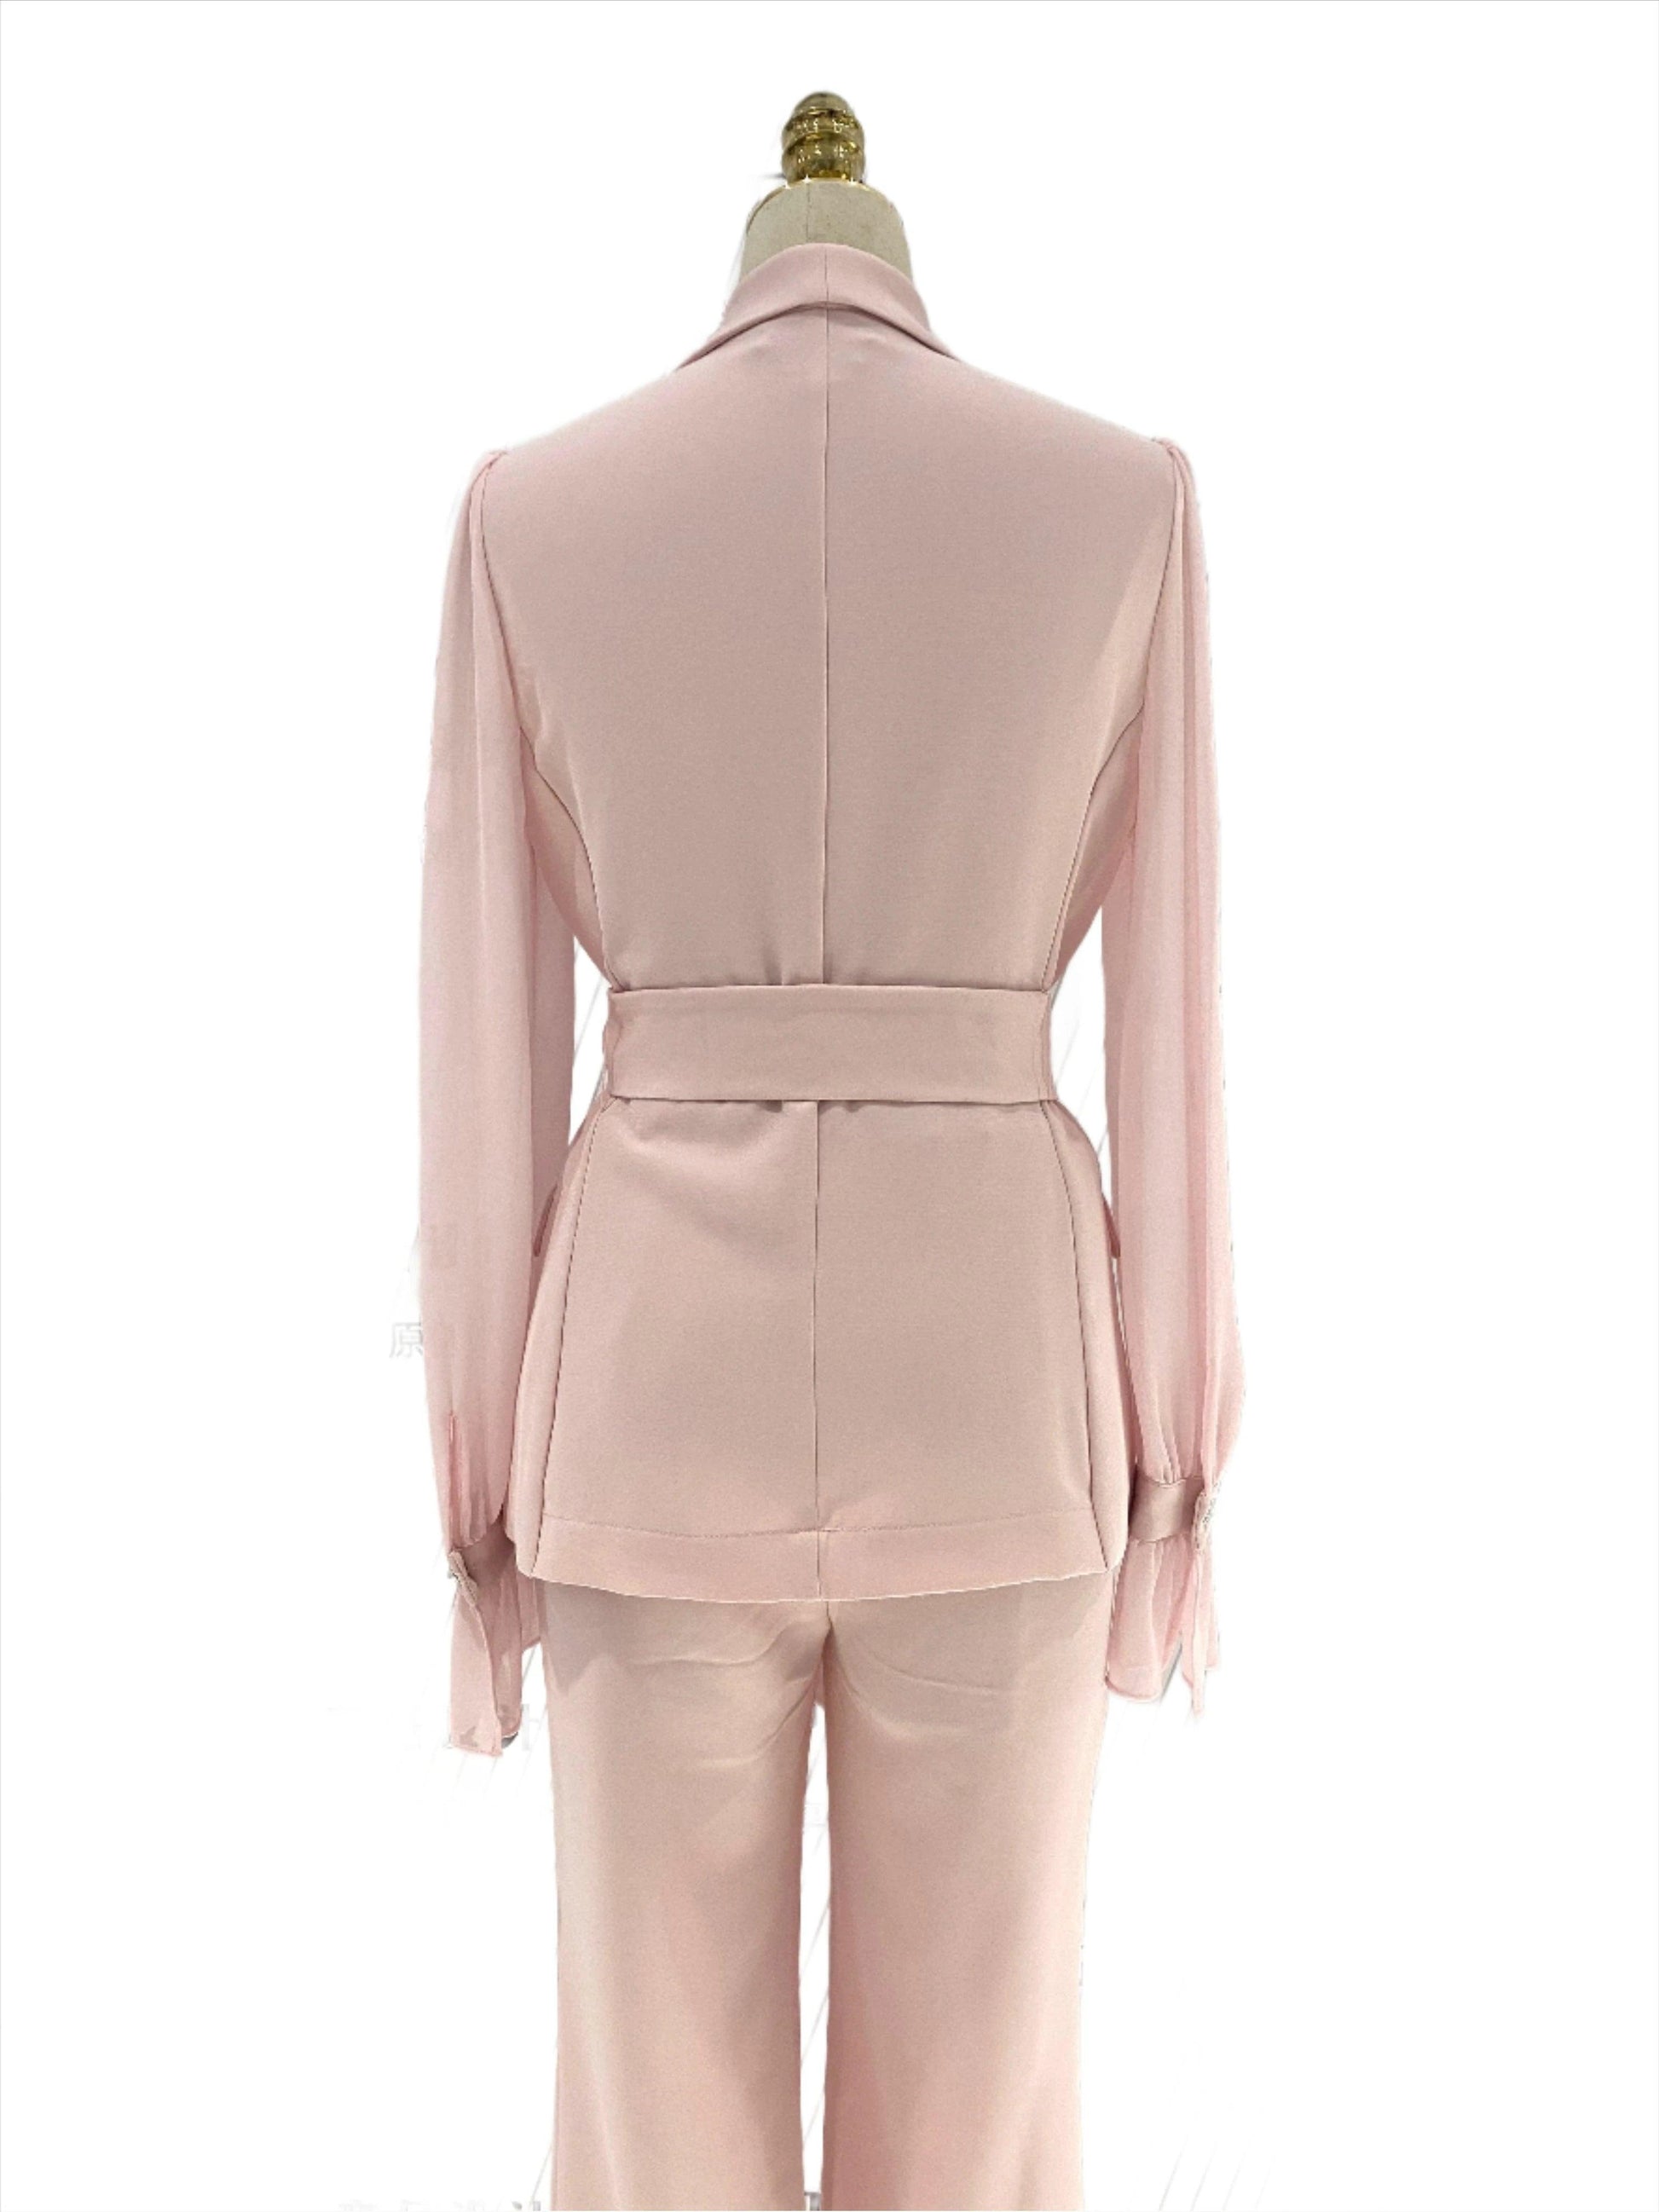 Belted Women Pant Suit, Spliced Sleeves -Two Piece Trouser Suit - Pantsuit - Guocali